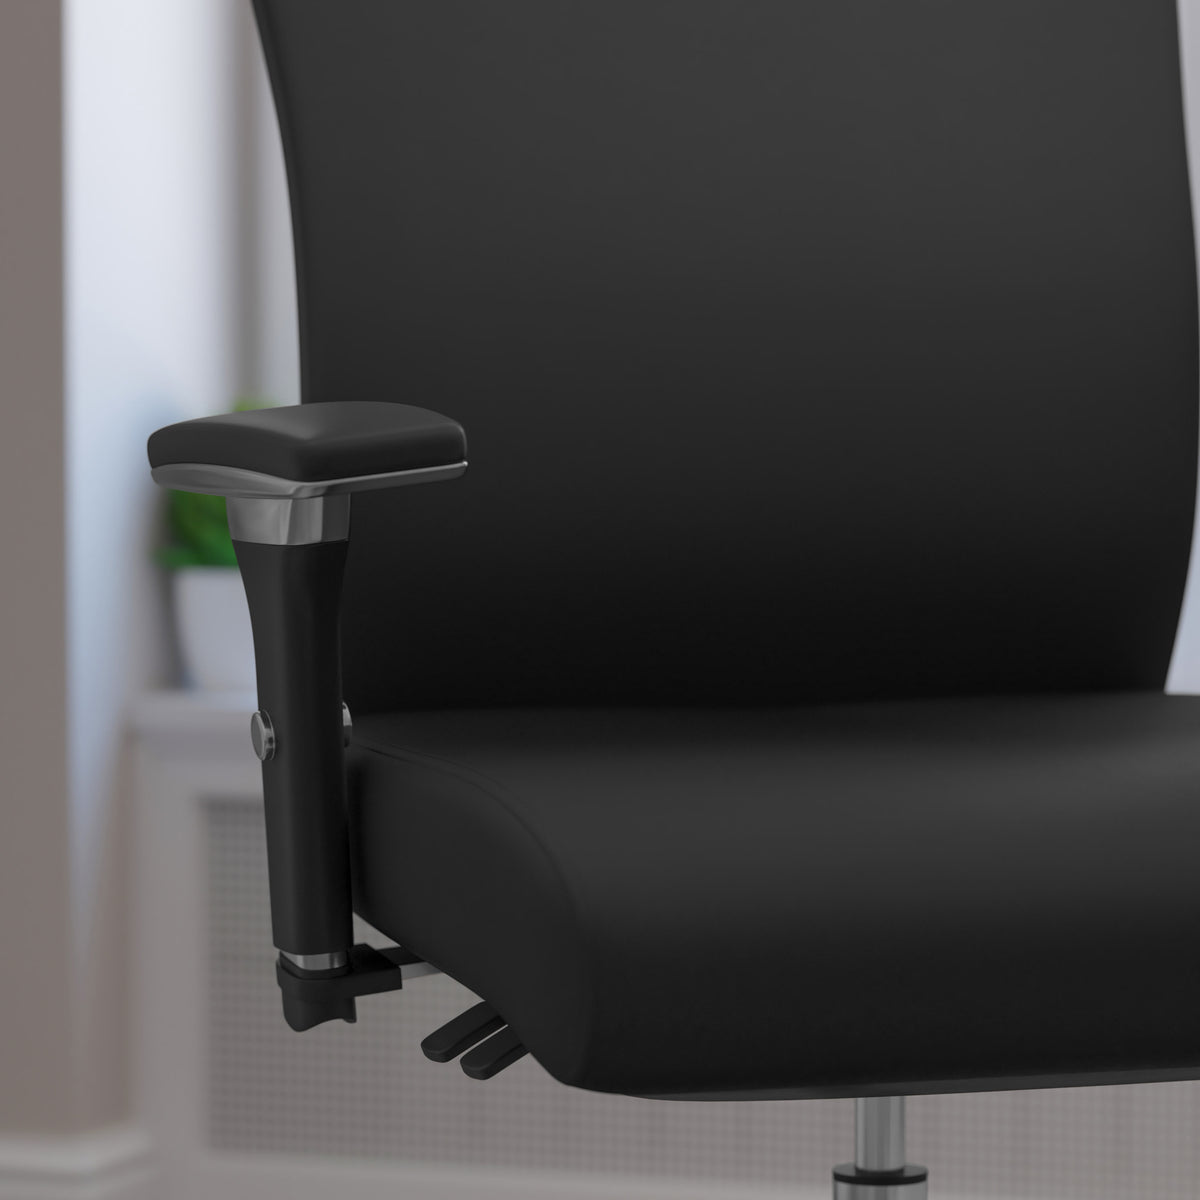 Black LeatherSoft |#| Intensive Use 300 lb. Rated Mid-Back Black LeatherSoft Multifunction Chair